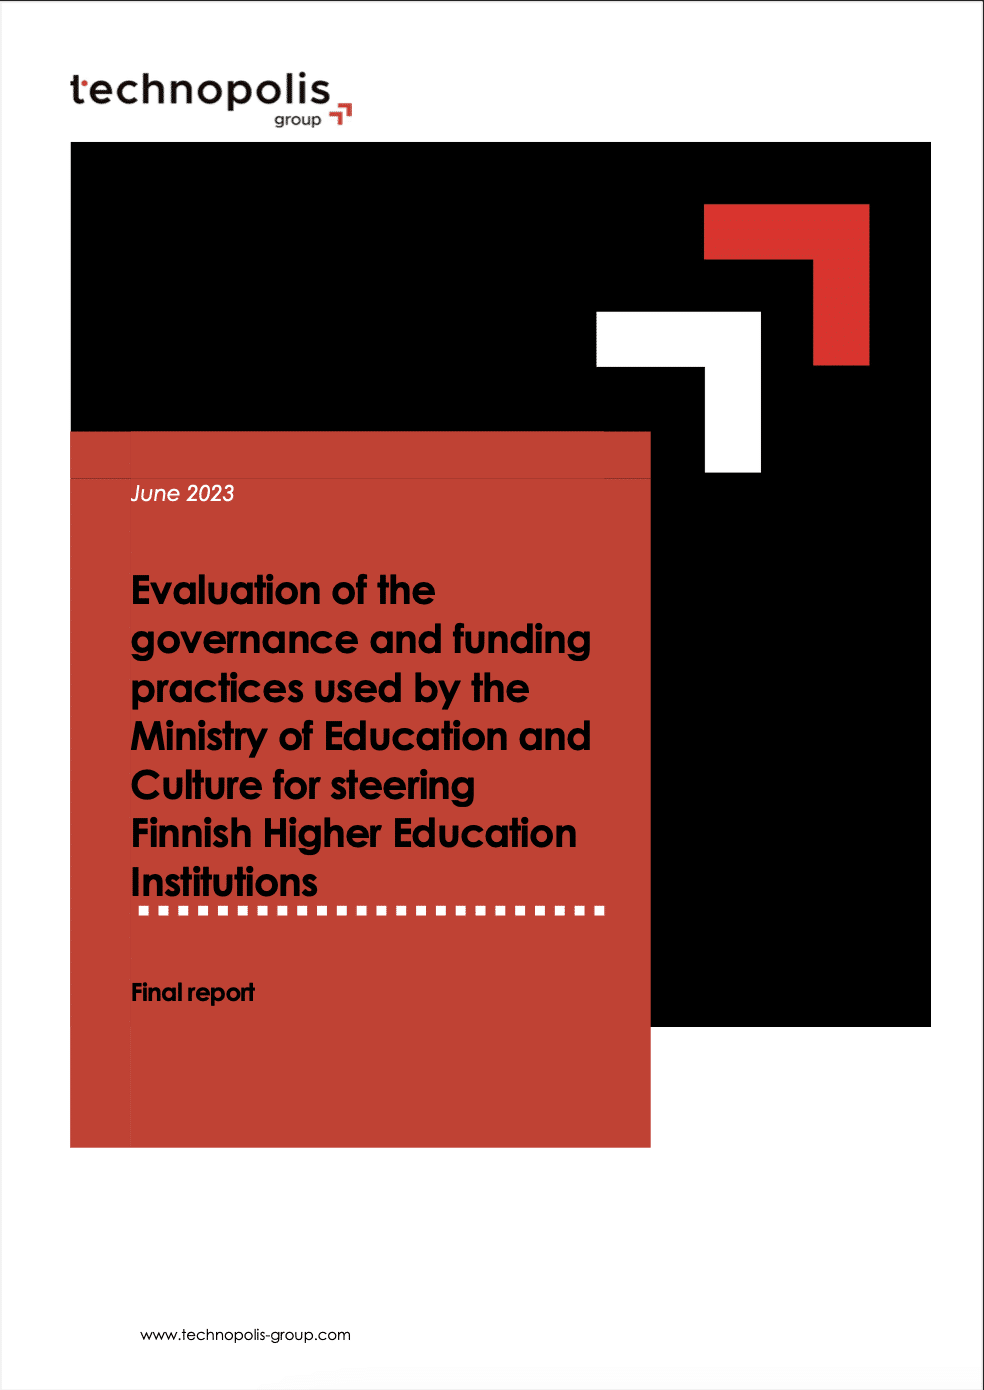 Evaluation of the governance and funding practices used by the Ministry of Education and Culture for steering Finnish Higher Education Institutions